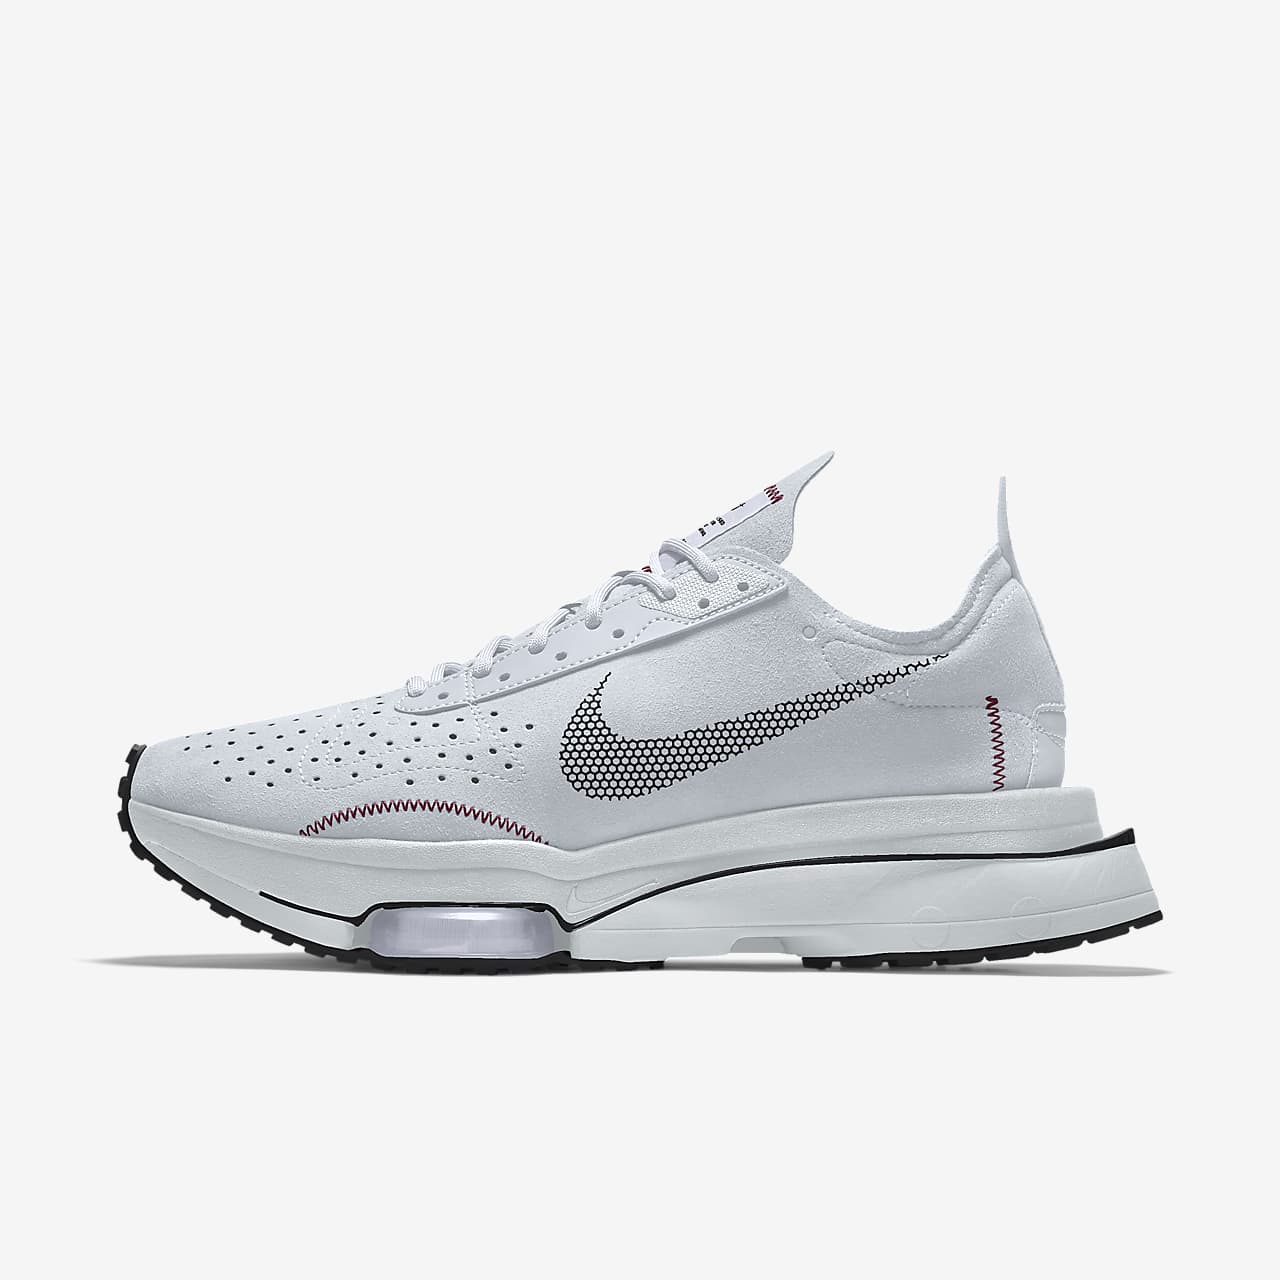 nike zoom by you